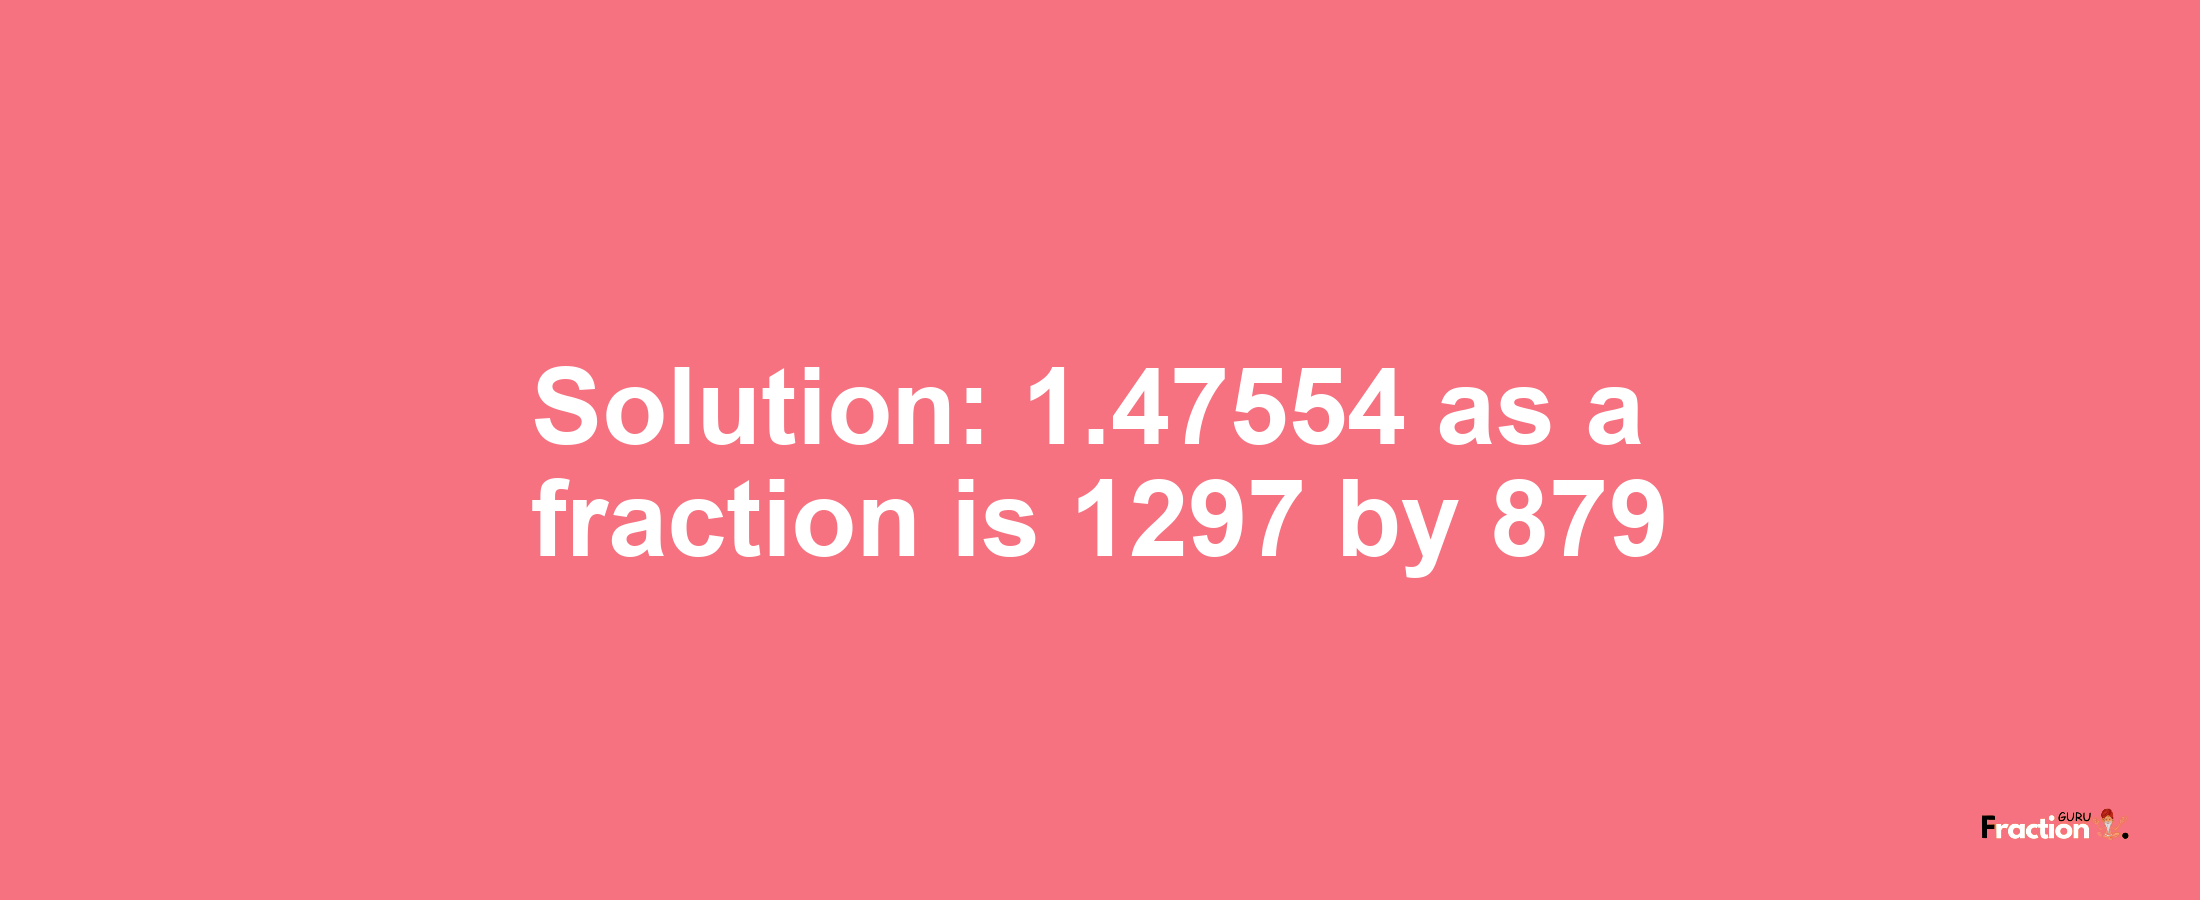 Solution:1.47554 as a fraction is 1297/879